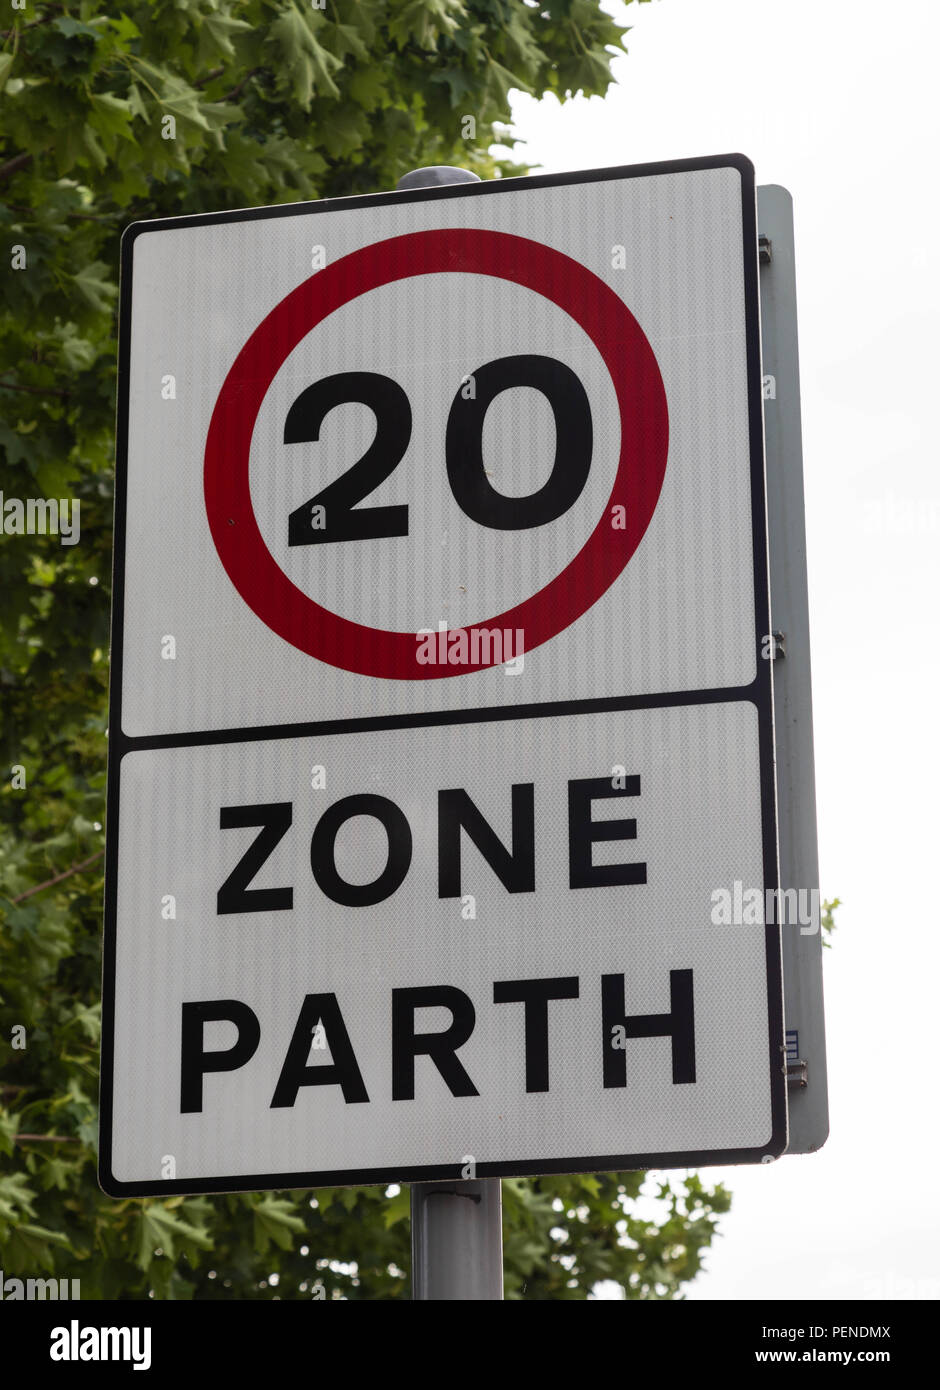 Bilingual street sign in English and Welsh stating a speed limit or parth of 20 miles per hour Wrexham Wales June 2018 Stock Photo